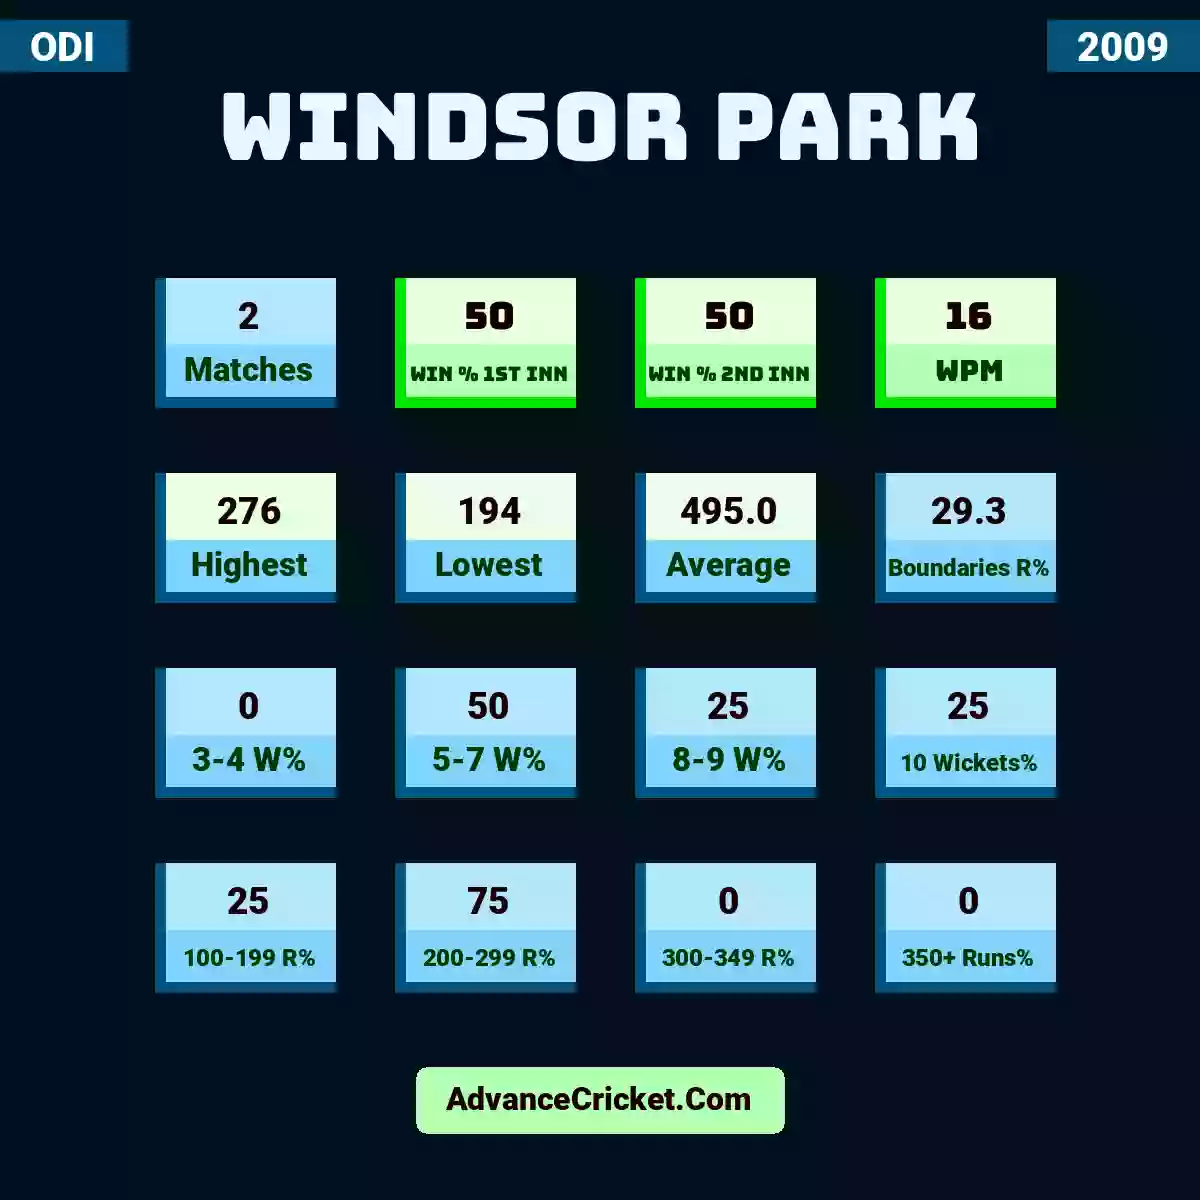 Image showing Windsor Park with Matches: 2, Win % 1st Inn: 50, Win % 2nd Inn: 50, WPM: 16, Highest: 276, Lowest: 194, Average: 495.0, Boundaries R%: 29.3, 3-4 W%: 0, 5-7 W%: 50, 8-9 W%: 25, 10 Wickets%: 25, 100-199 R%: 25, 200-299 R%: 75, 300-349 R%: 0, 350+ Runs%: 0.